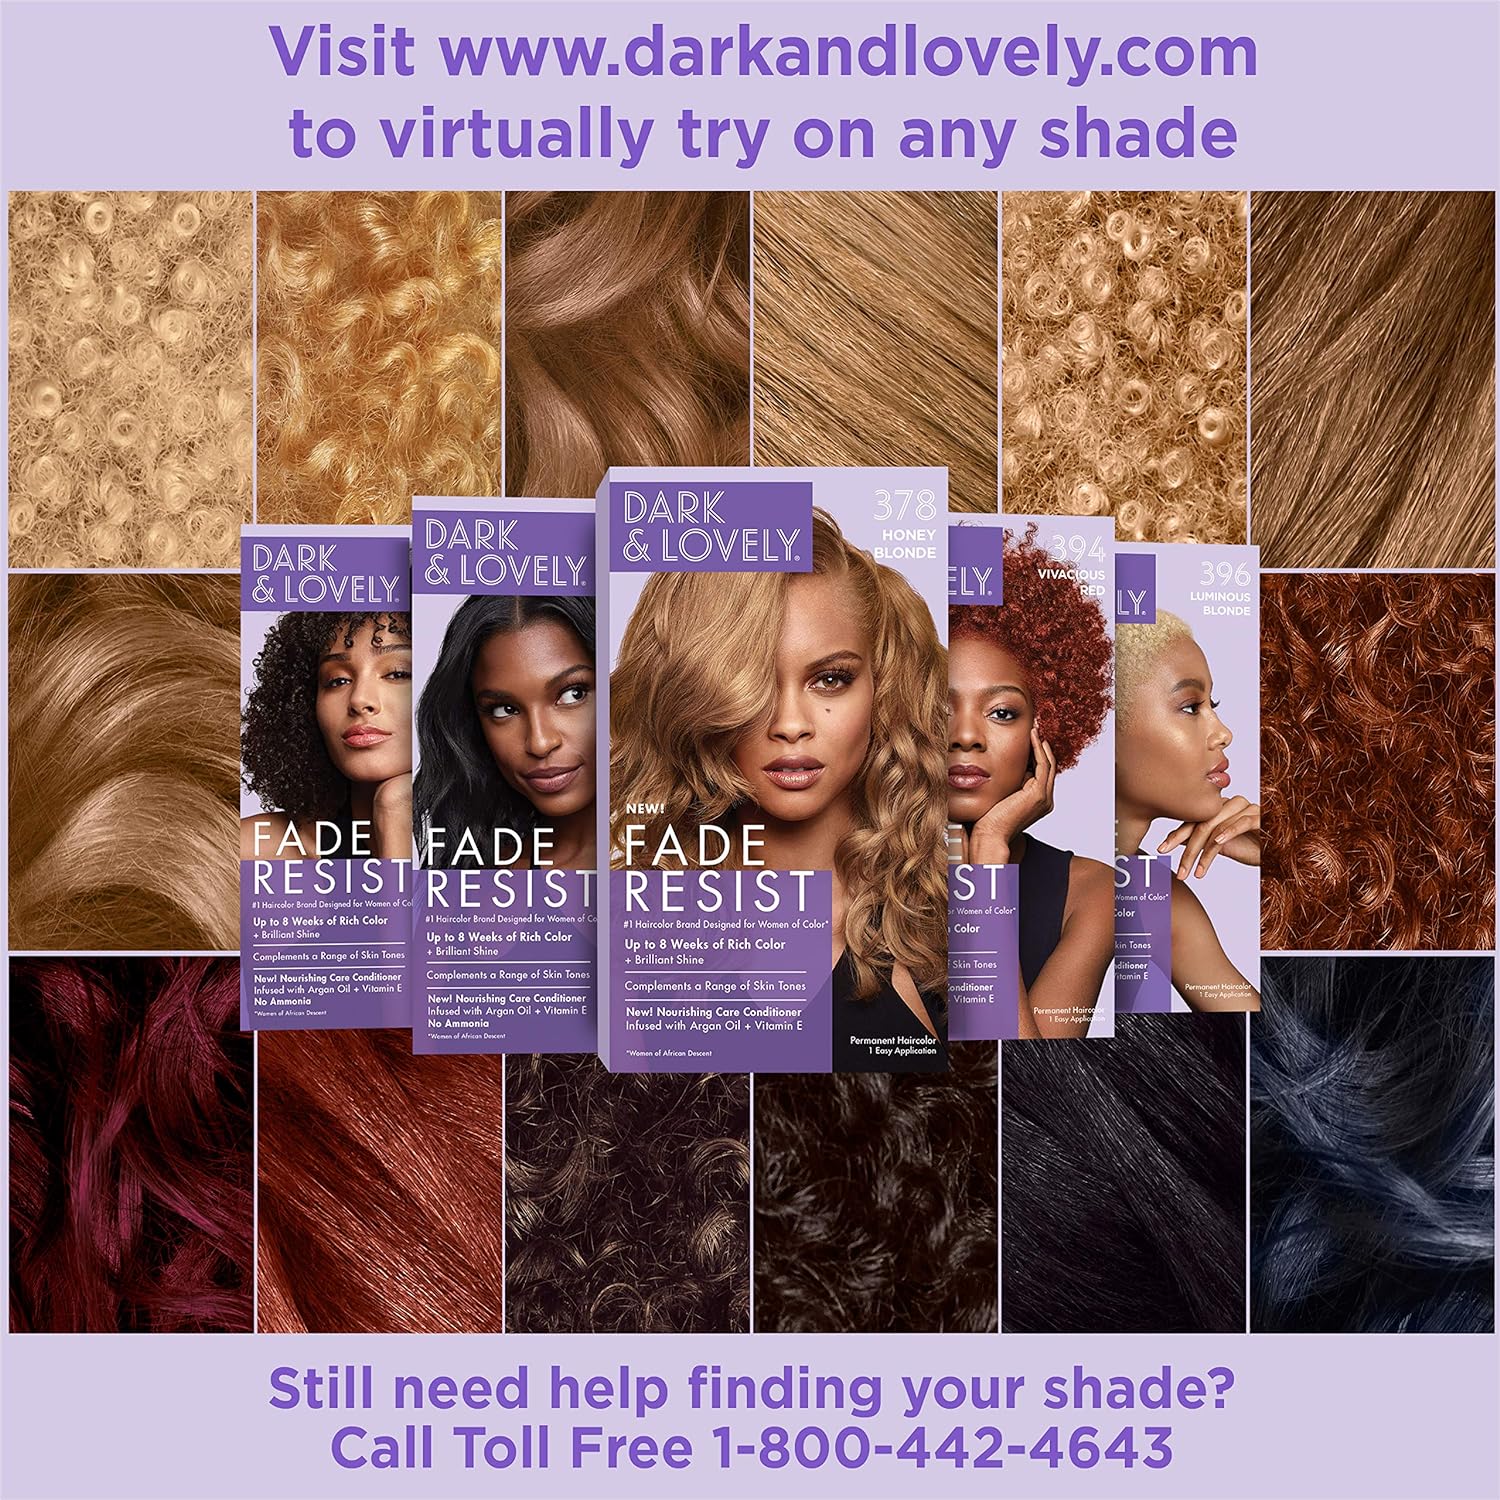 SoftSheen-Carson Dark and Lovely Fade Resist Rich Conditioning Hair Color, Permanent Hair Color, Up To 100 percent Gray Coverage, Brilliant Shine with Argan Oil and Vitamin E, Chestnut Blonde : Chemical Hair Dyes : Beauty & Personal Care